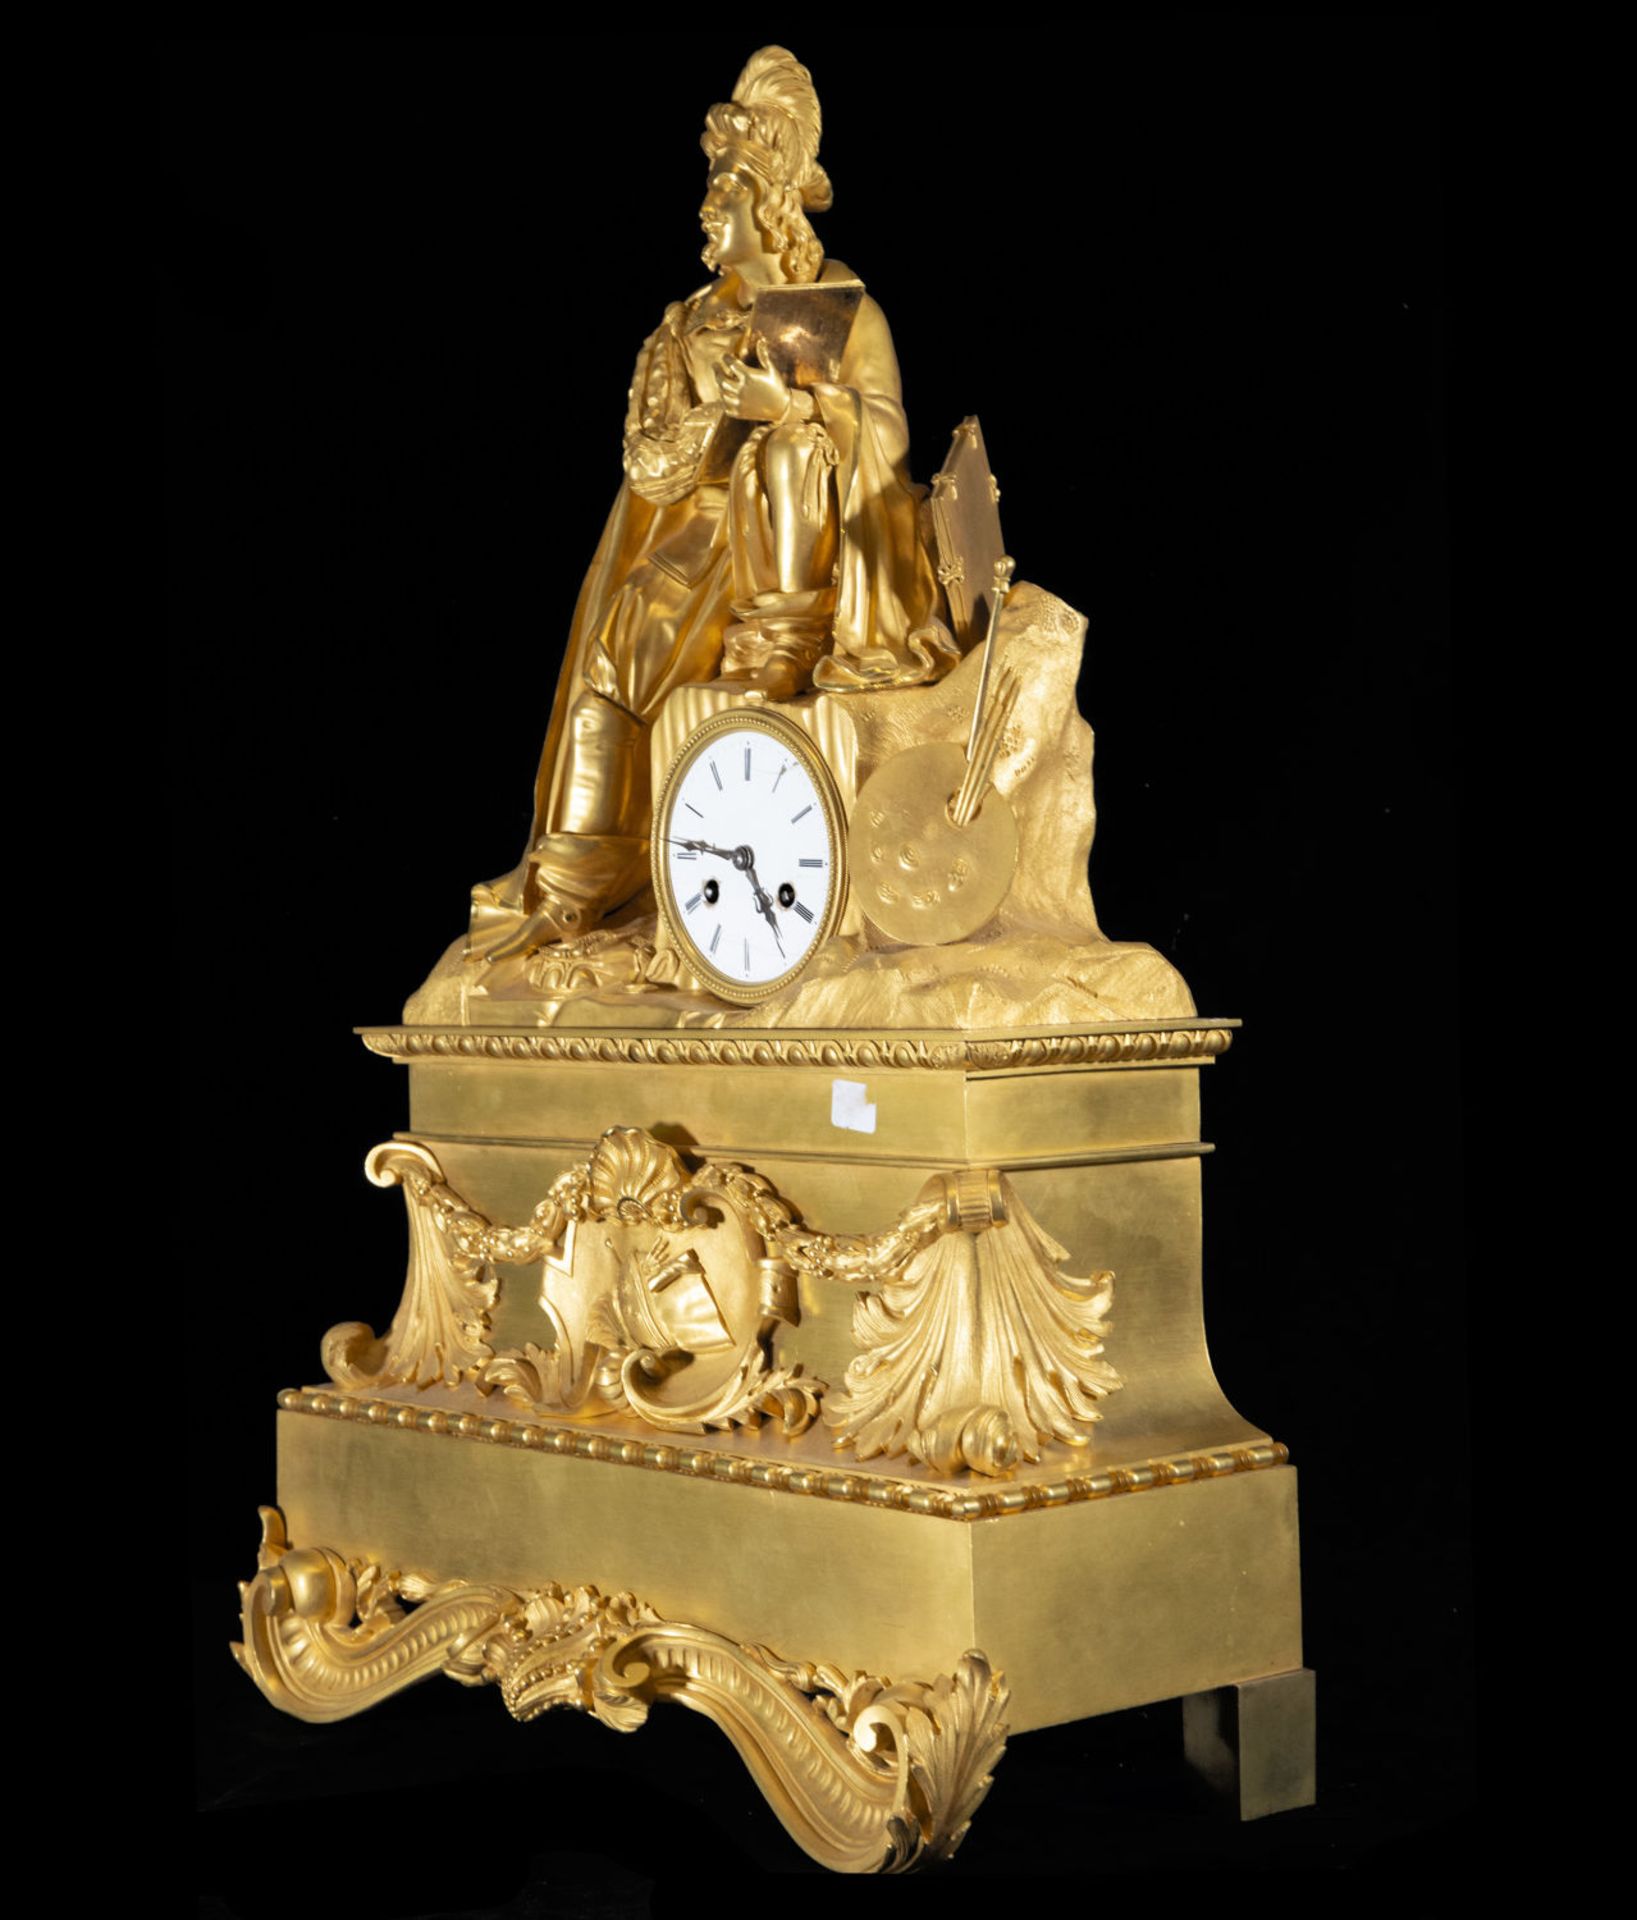 Large Empire table clock with the motif of Michelangelo Buonarroti, 19th century French school - Image 4 of 8